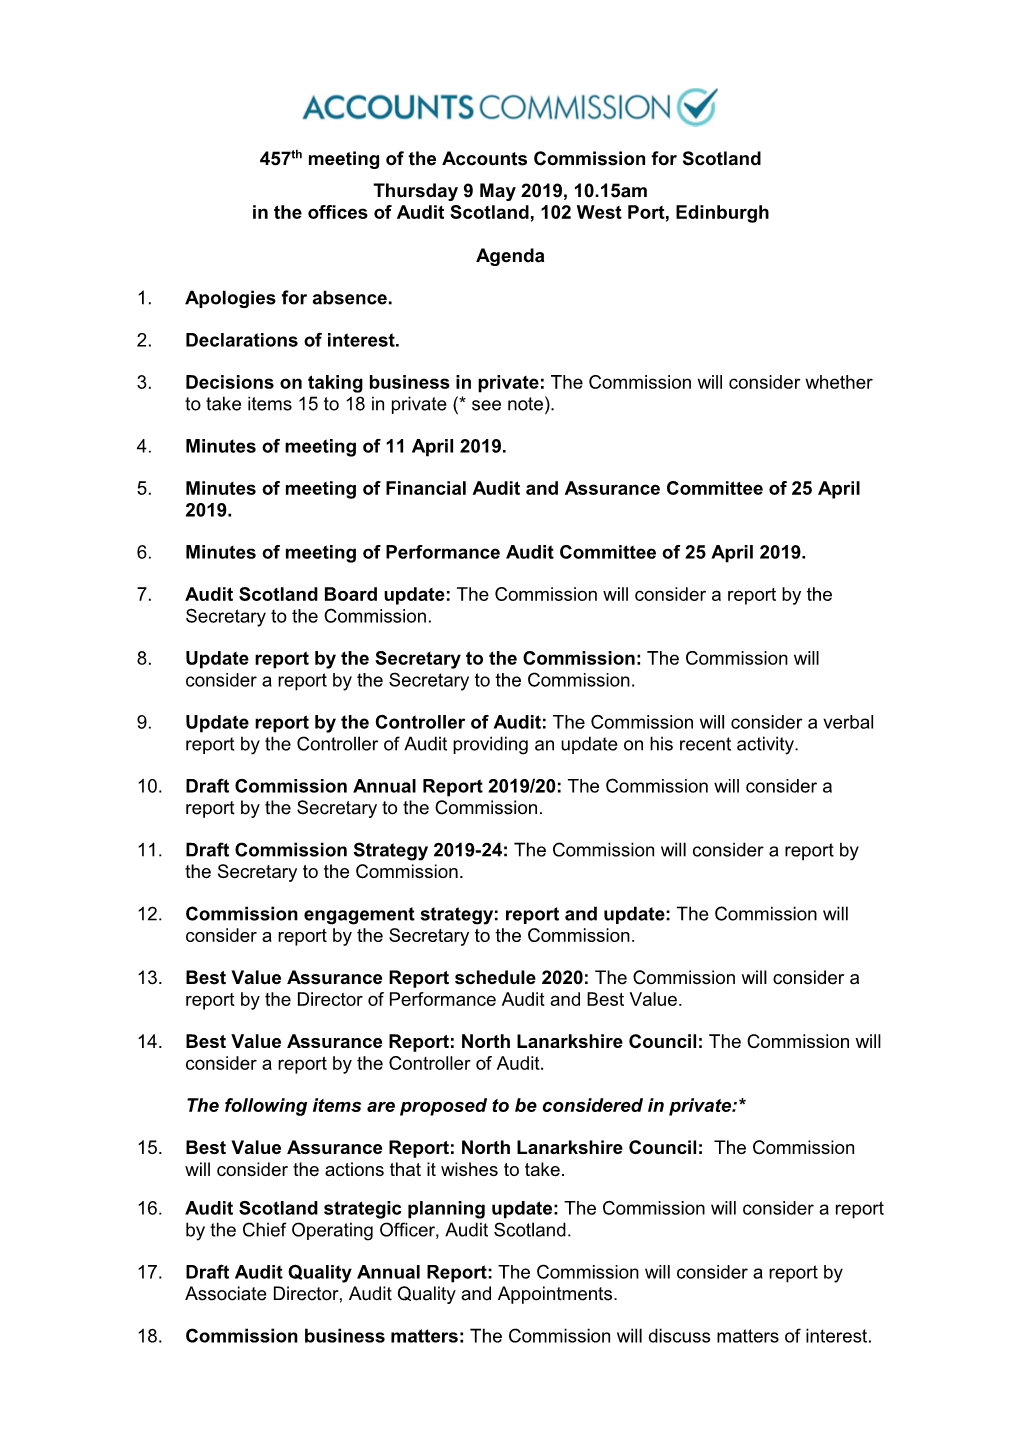 Accounts Commission Agenda and Papers 9 May 2019